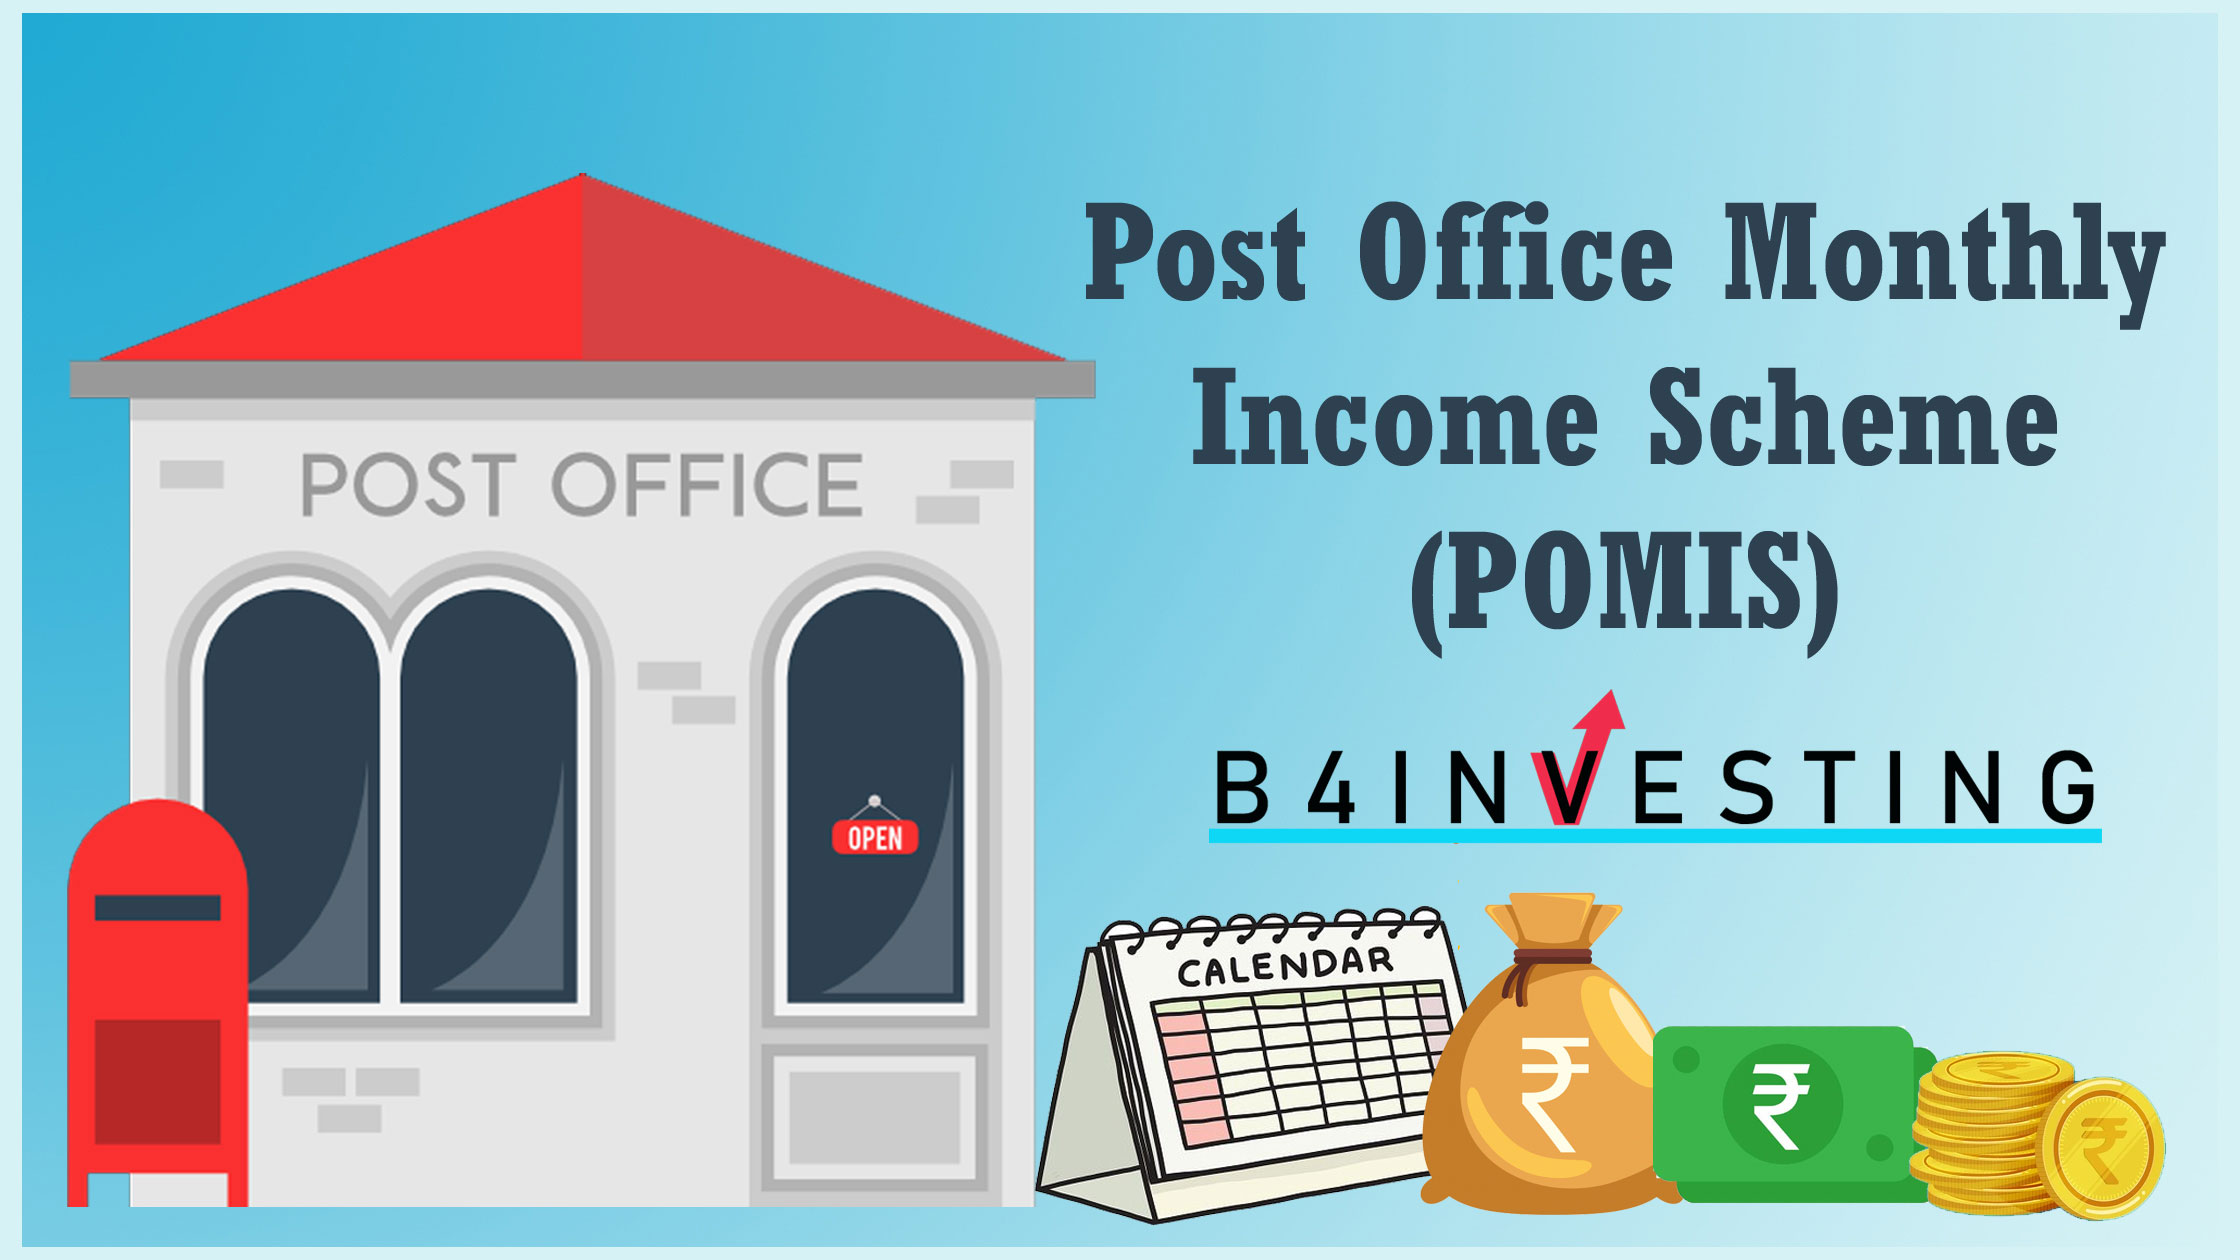 Read how to invest in Post Office Monthly Scheme on b4investing